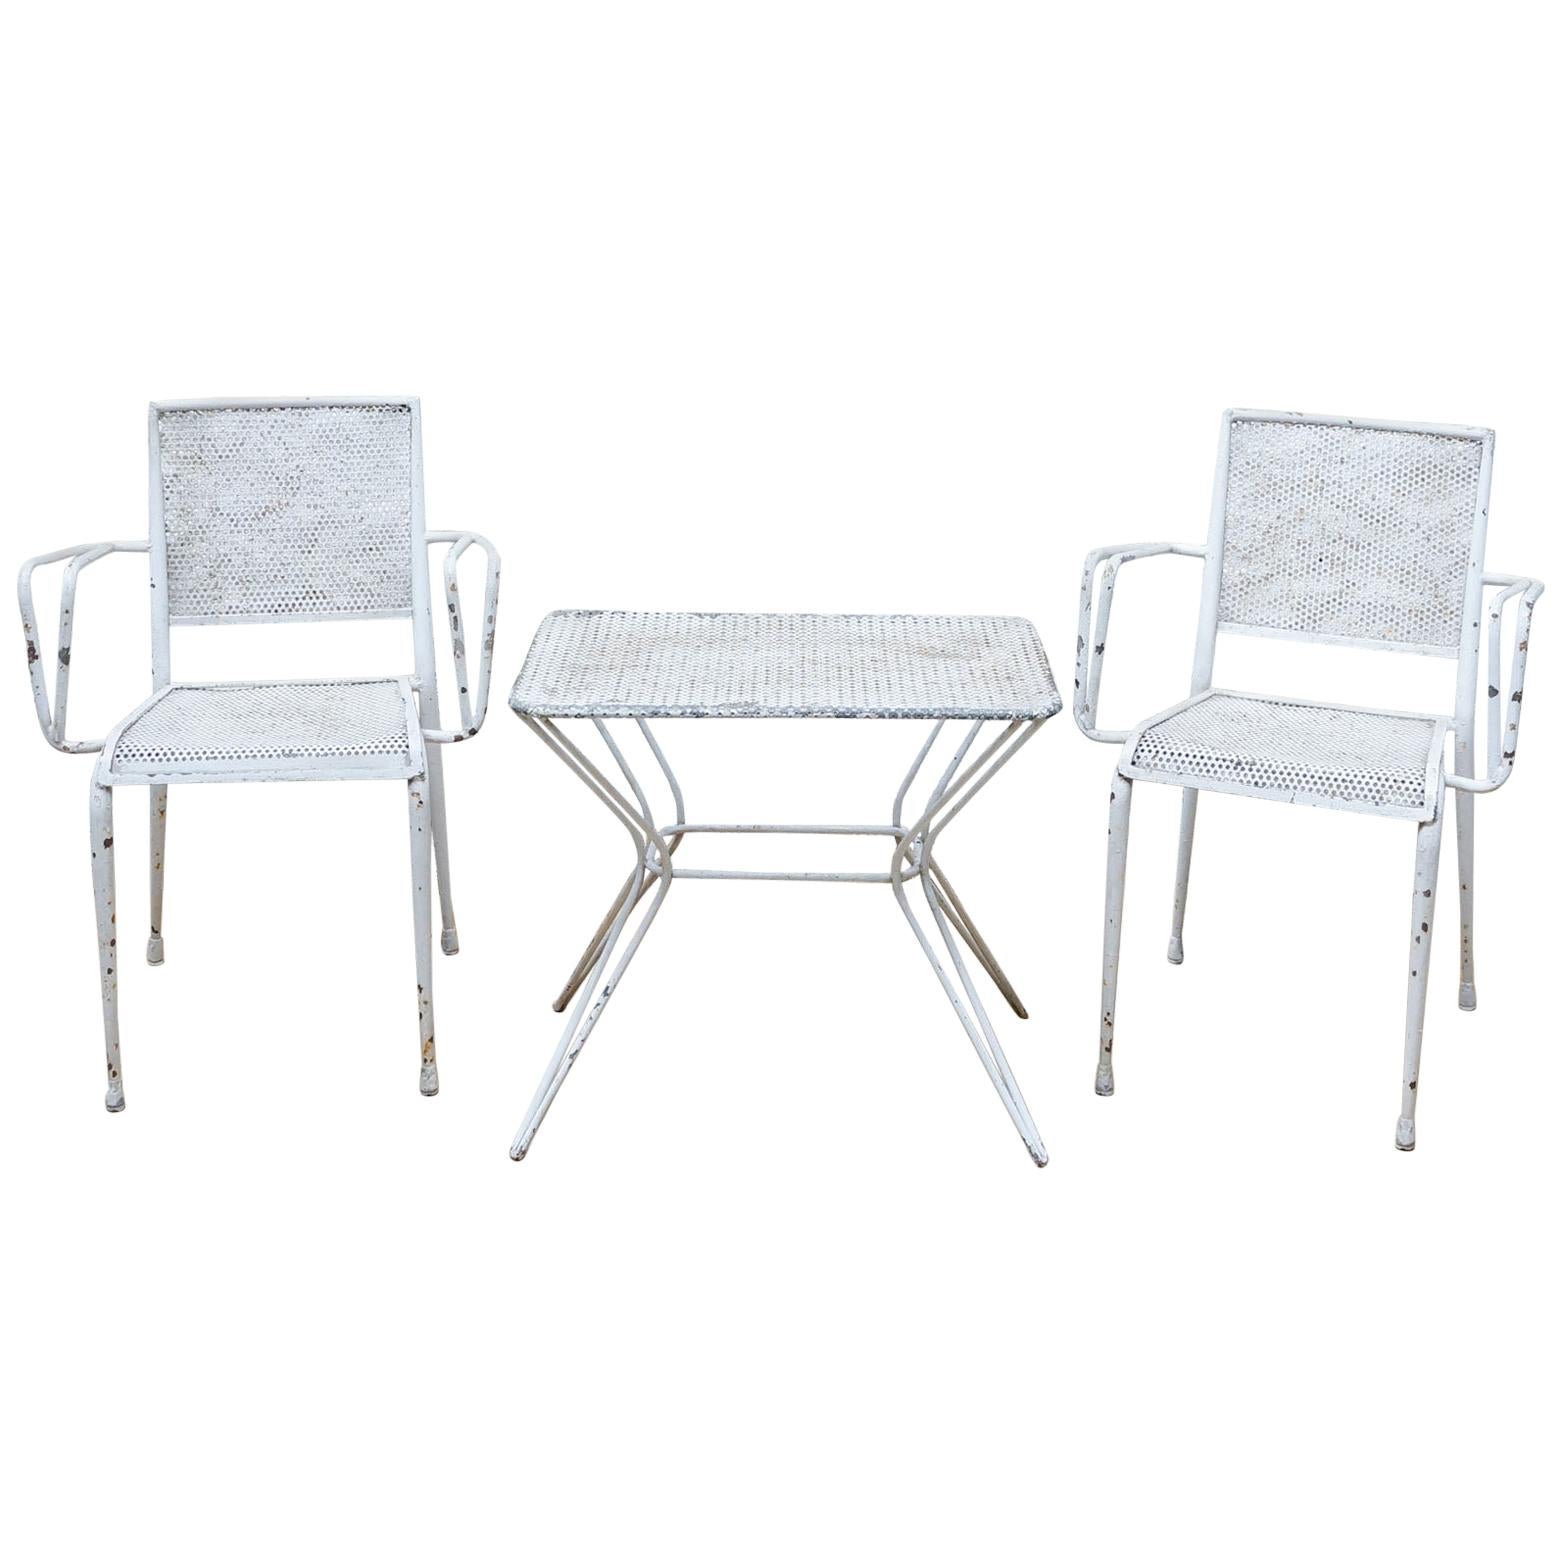 Garden Table and Chairs Set in the Style of Mathieu Matégot, circa 1960